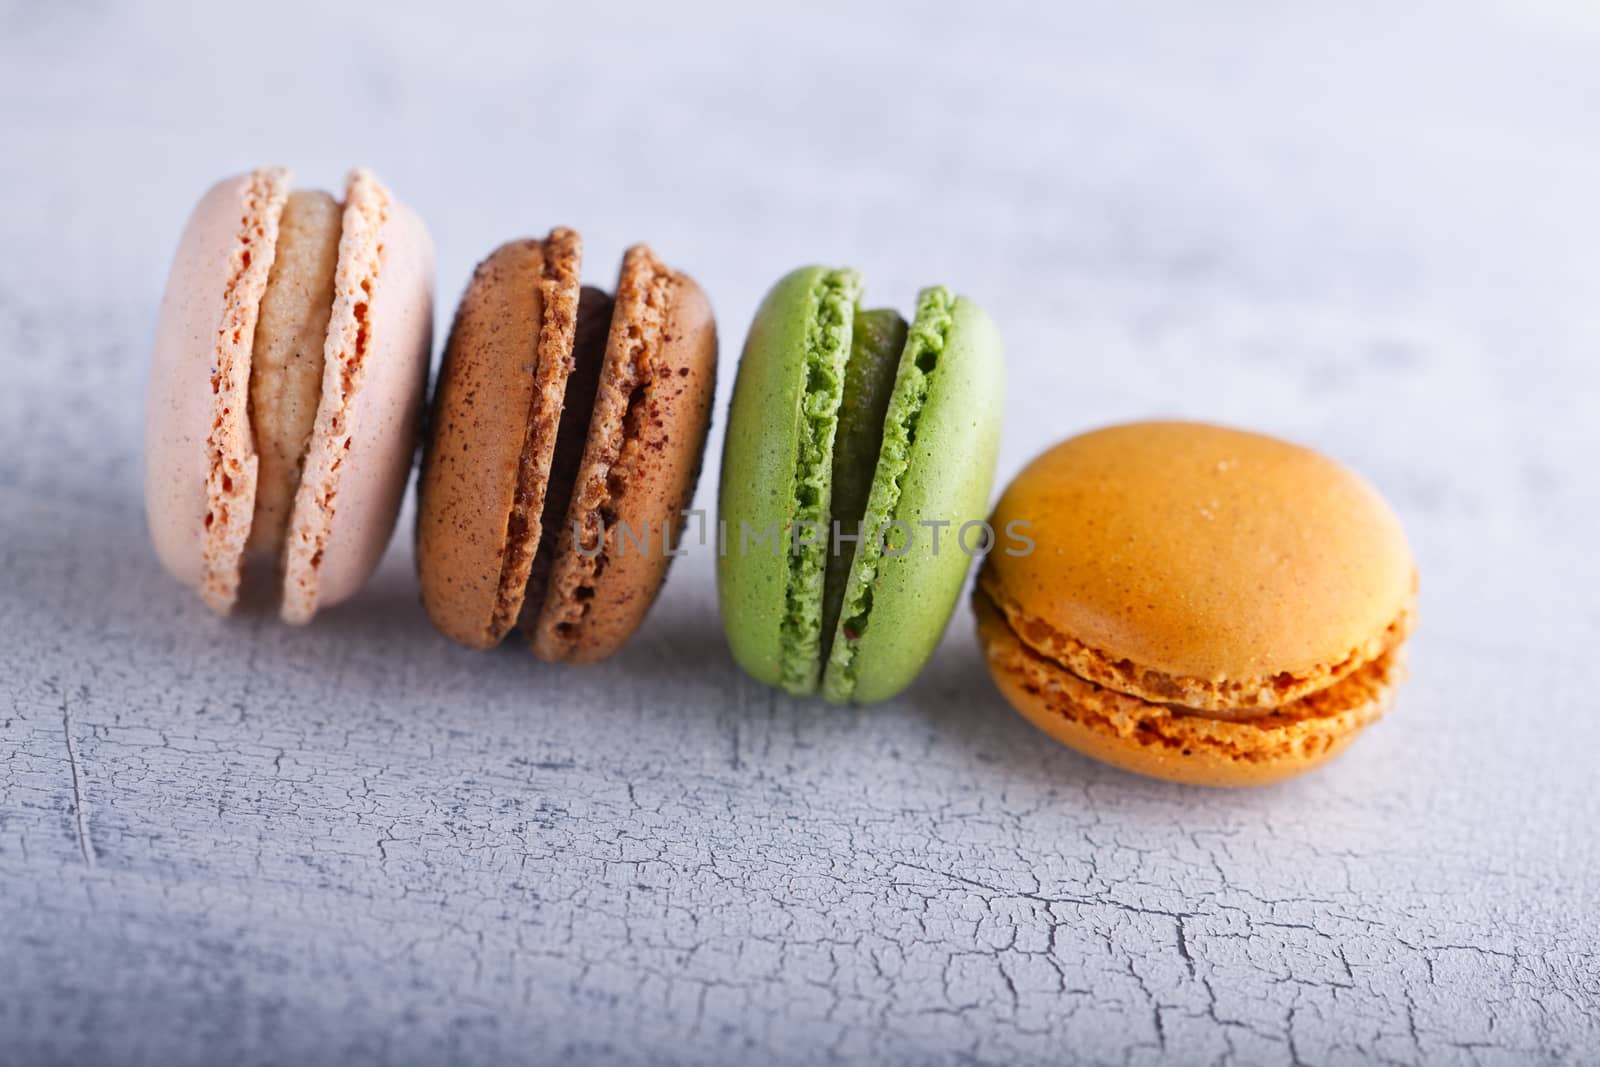 Colorful french macaroons by supercat67